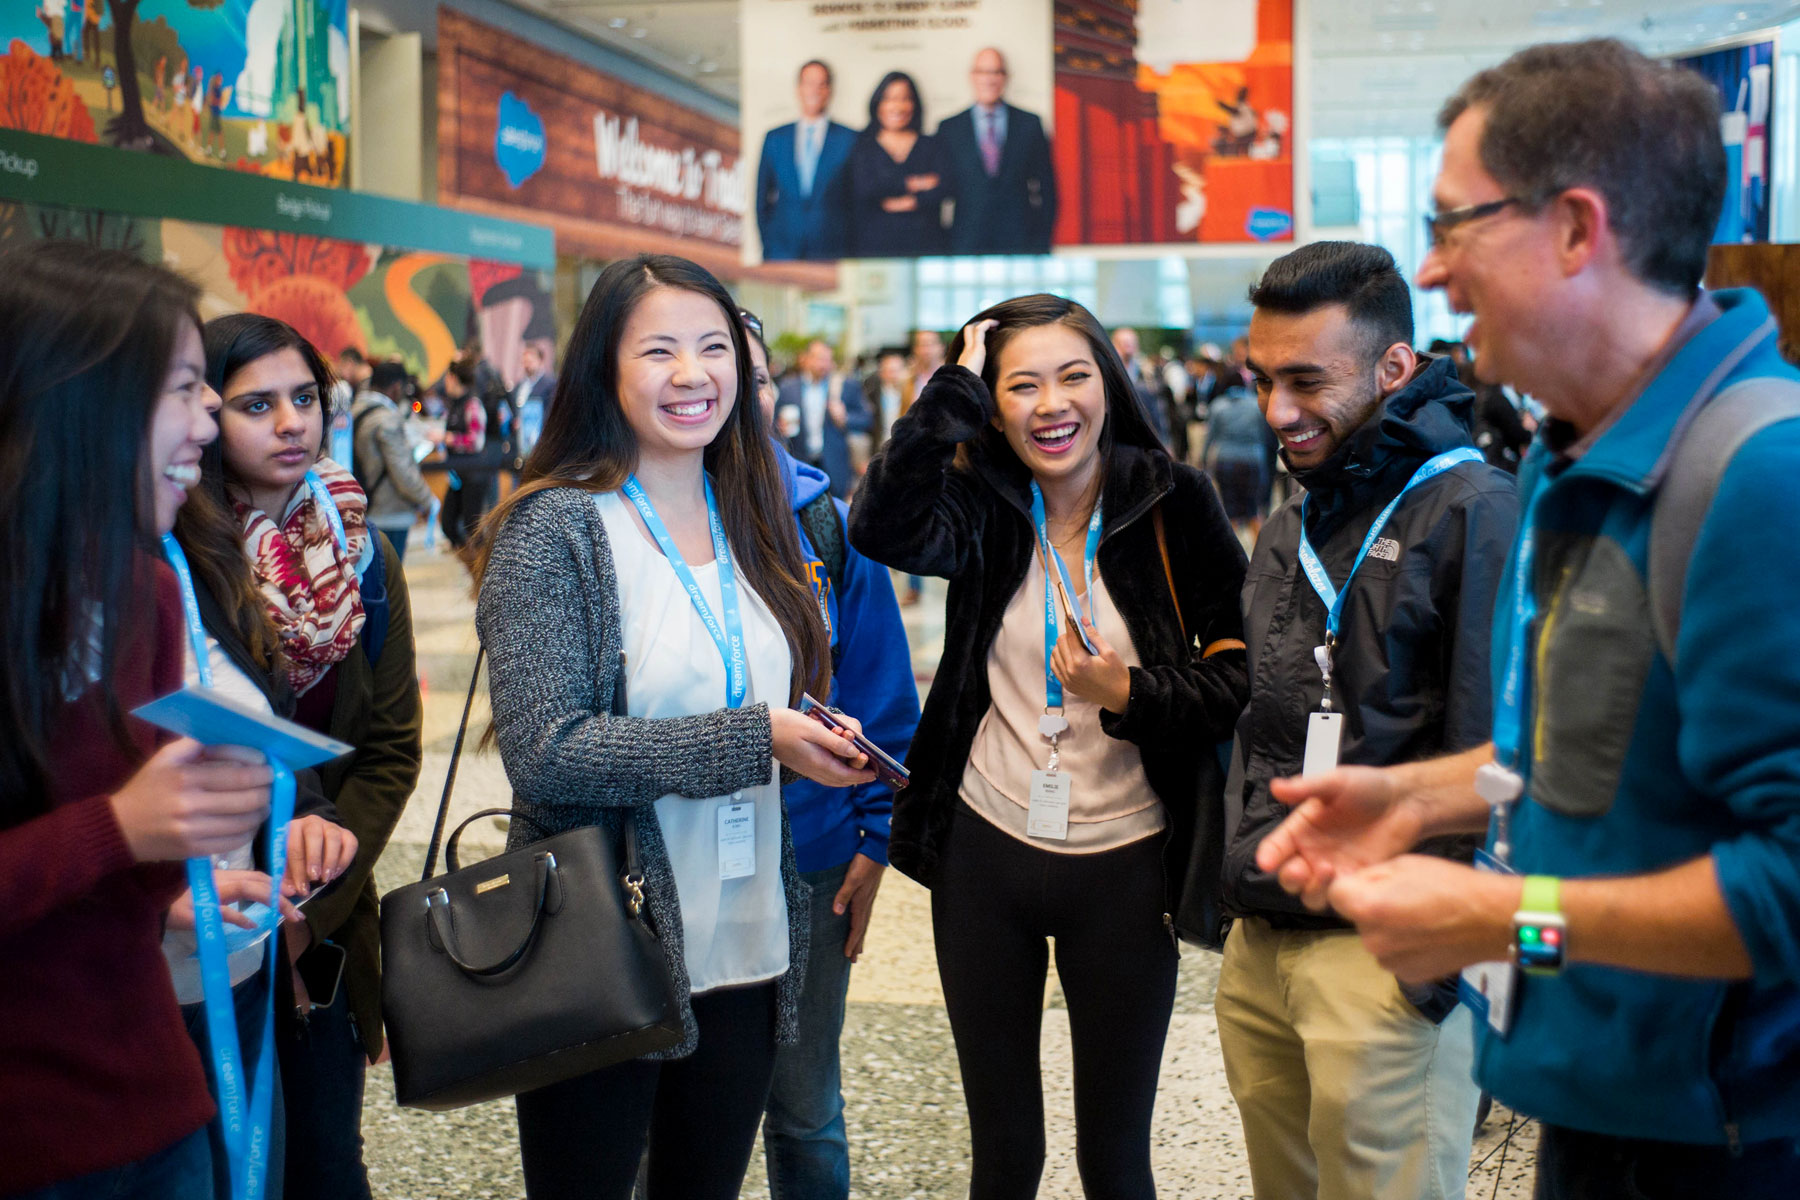 Students laughing while chatting at a Salesforce conference.